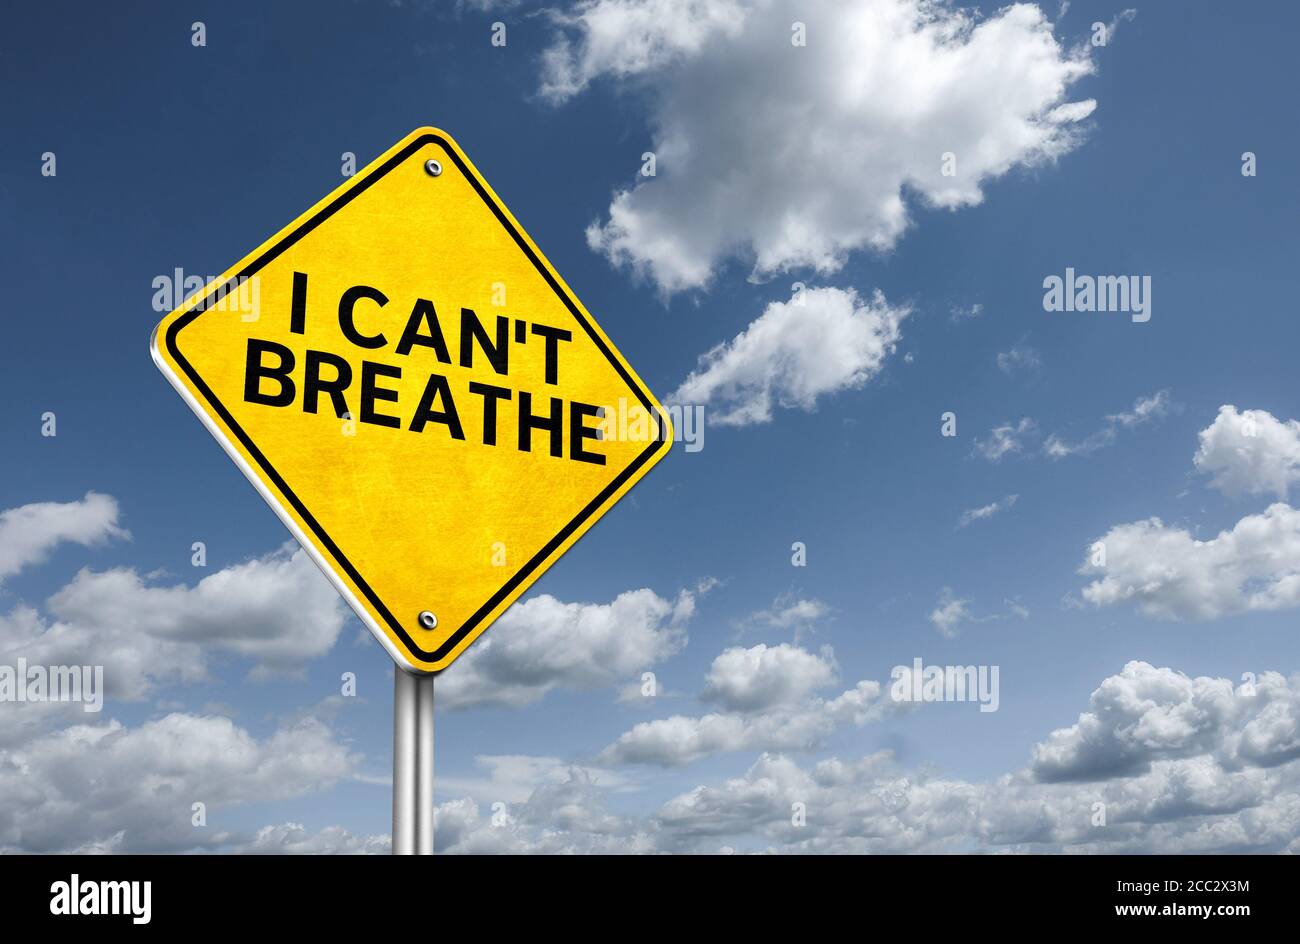 I can not breathe - roadsign message Stock Photo